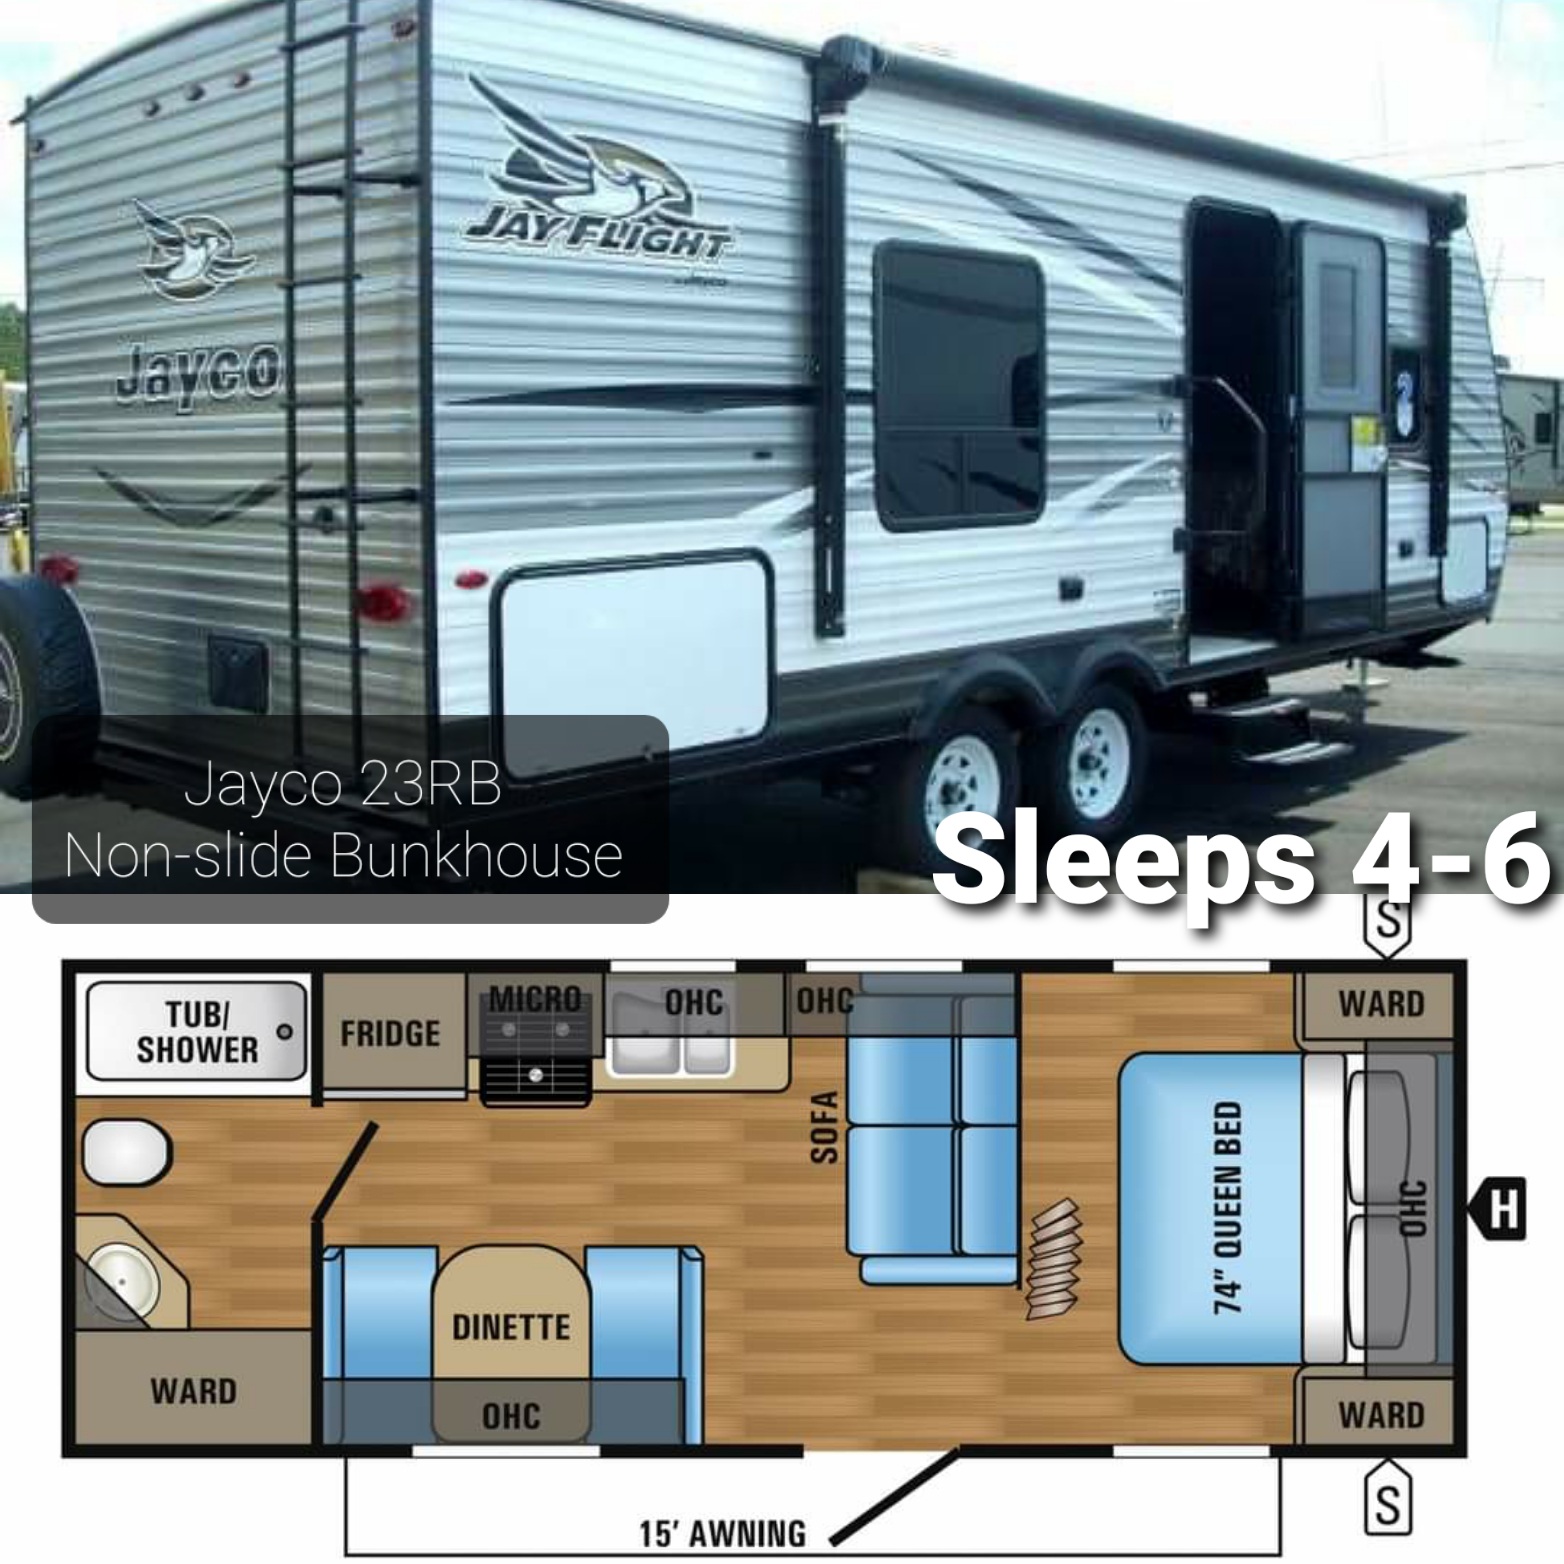 Rent A Class C Rv For A Month